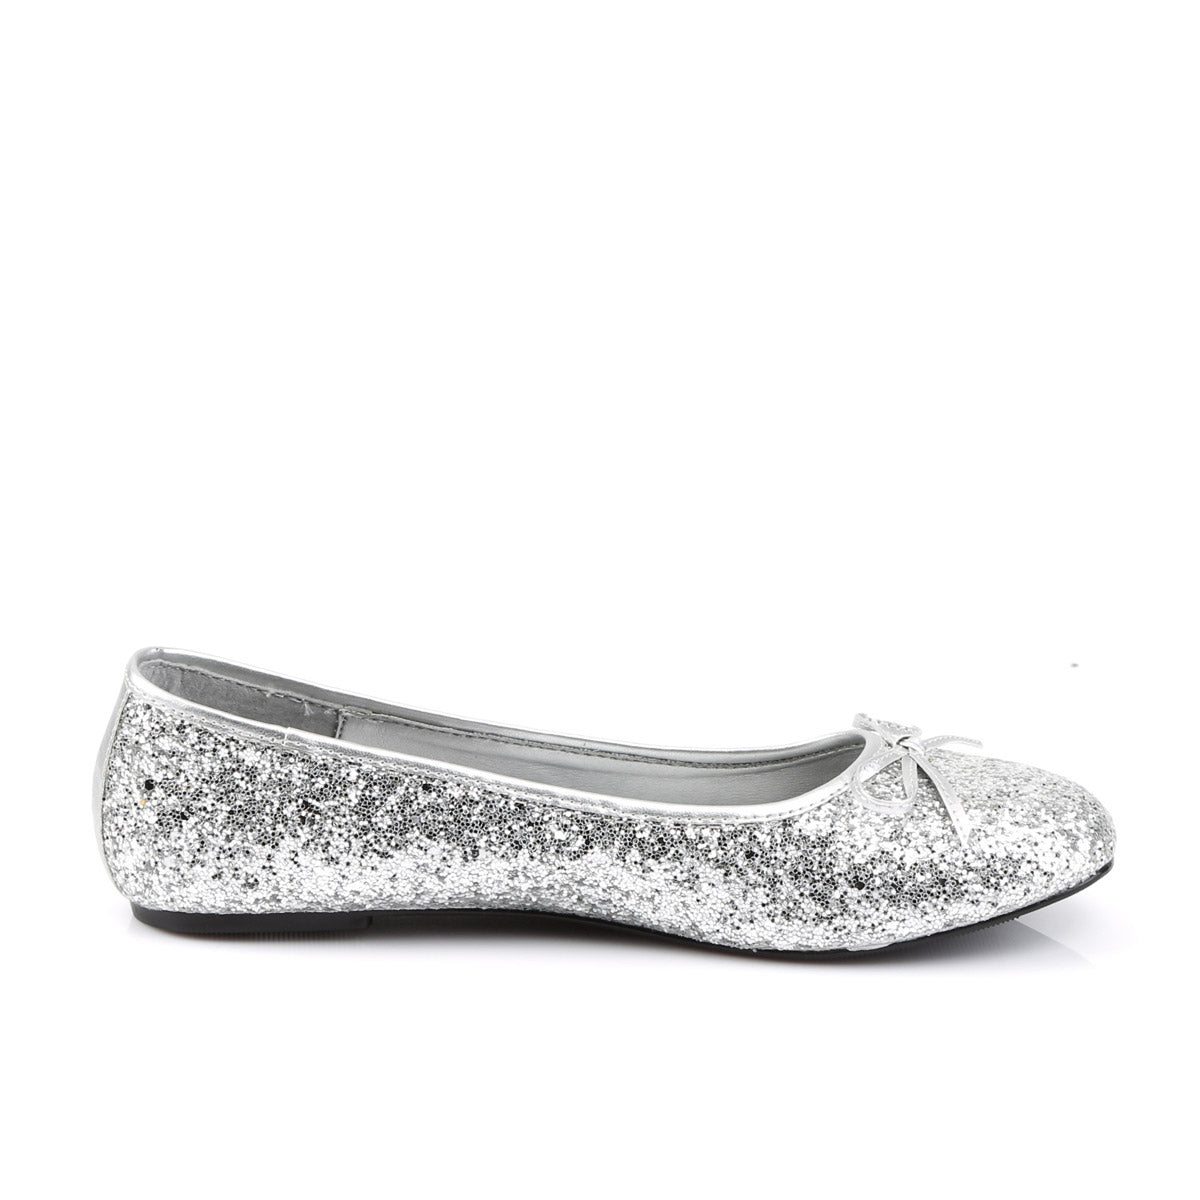 Classic Bow Accent Mary Jane Glitter Slip On Ballet Flats Shoes Pleaser Funtasma STAR/16G